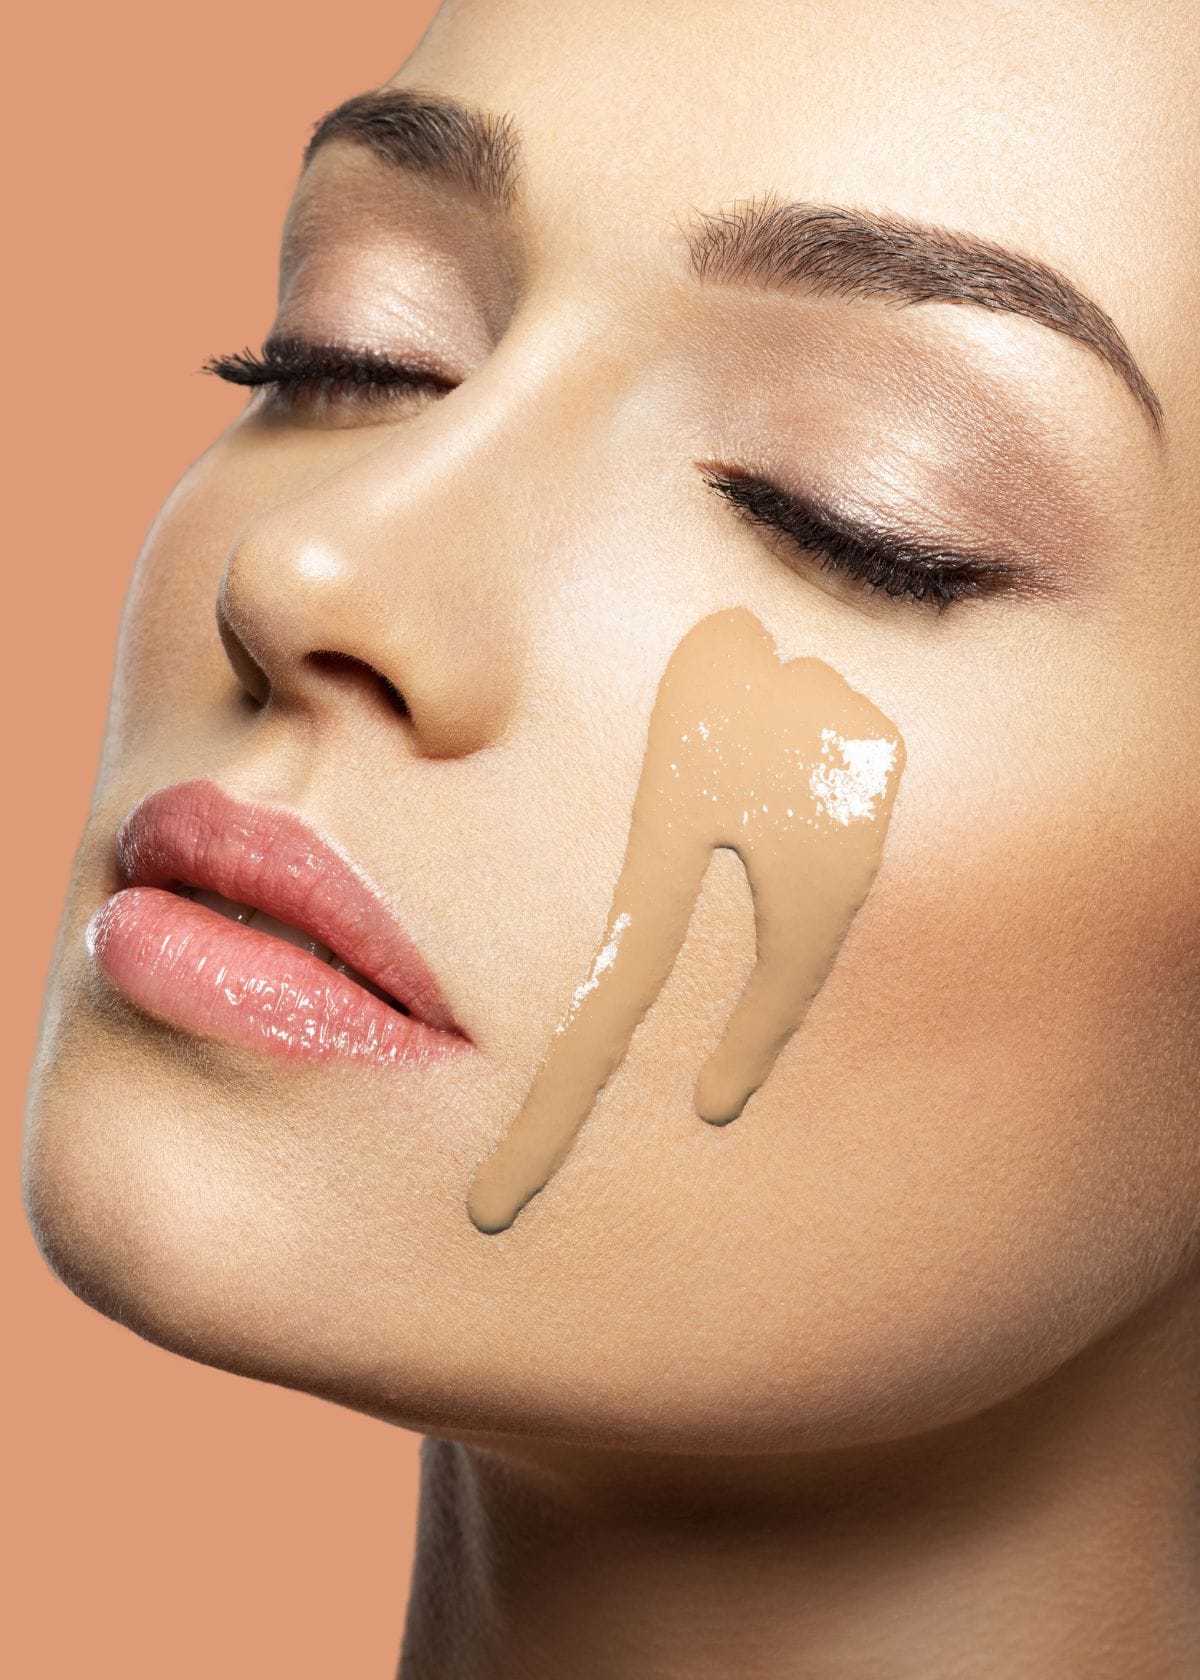 How to Apply Water Based Foundation